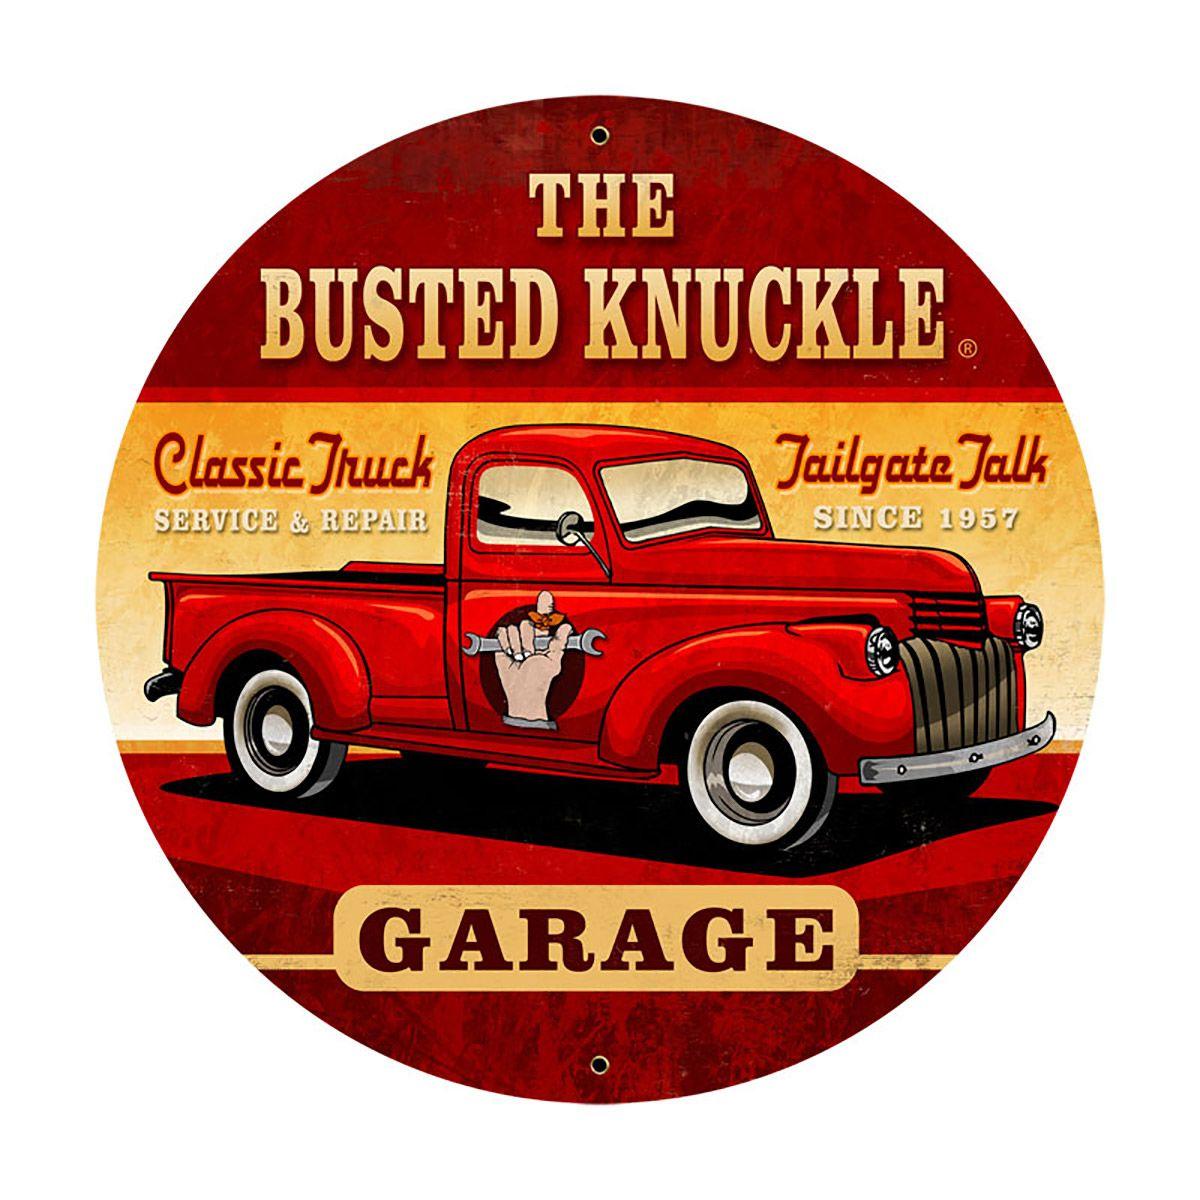 Busted Knuckle Garage Logo - Busted Knuckle Garage Pickup Truck Round Sign Large 28 x 28 at Retro ...